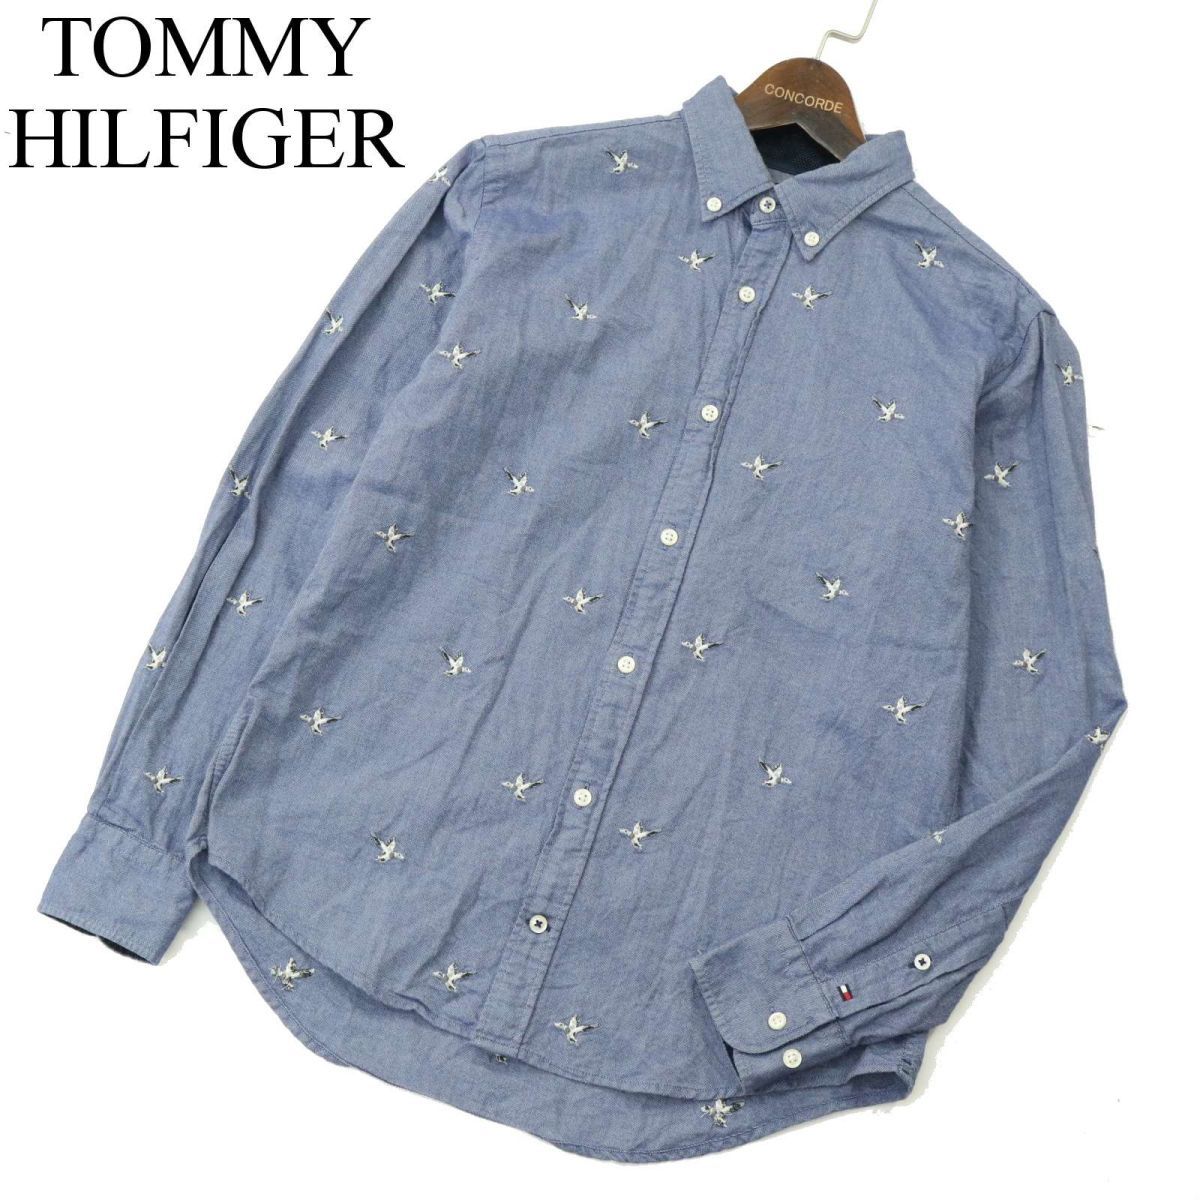 TOMMY HILFIGER トミーヒルフィガー New York Fit 通年 バード刺繍★ 総柄 長袖 シャツ Sz.S　メンズ　A4T00030_1#C_画像1